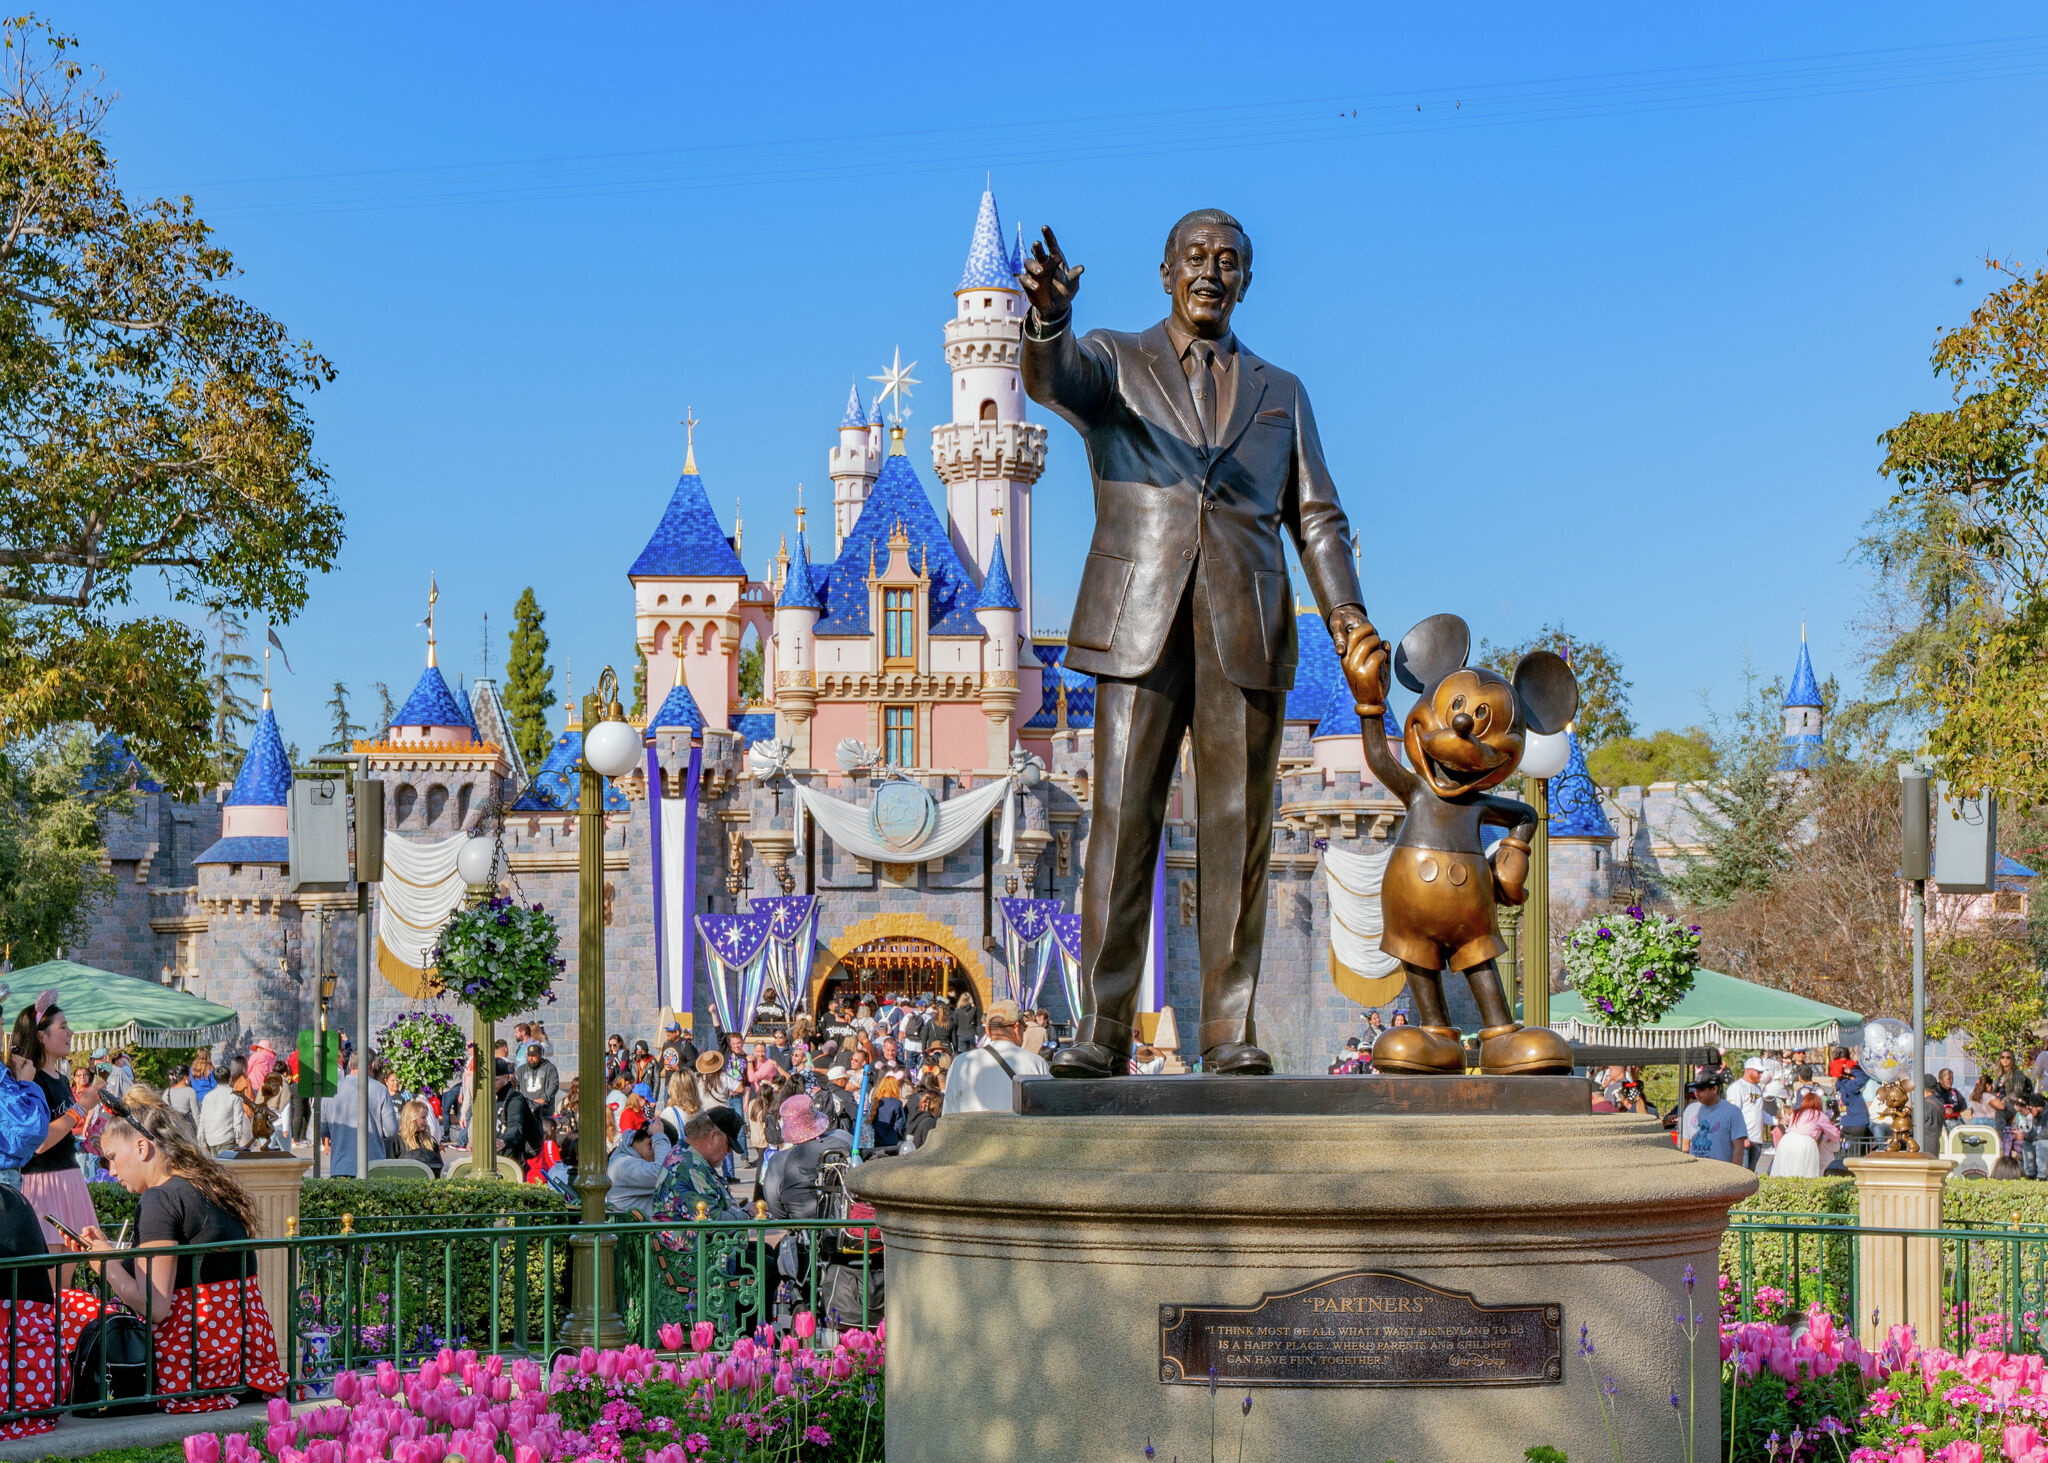 Cost of Disneyland: How much a single park day will cost you